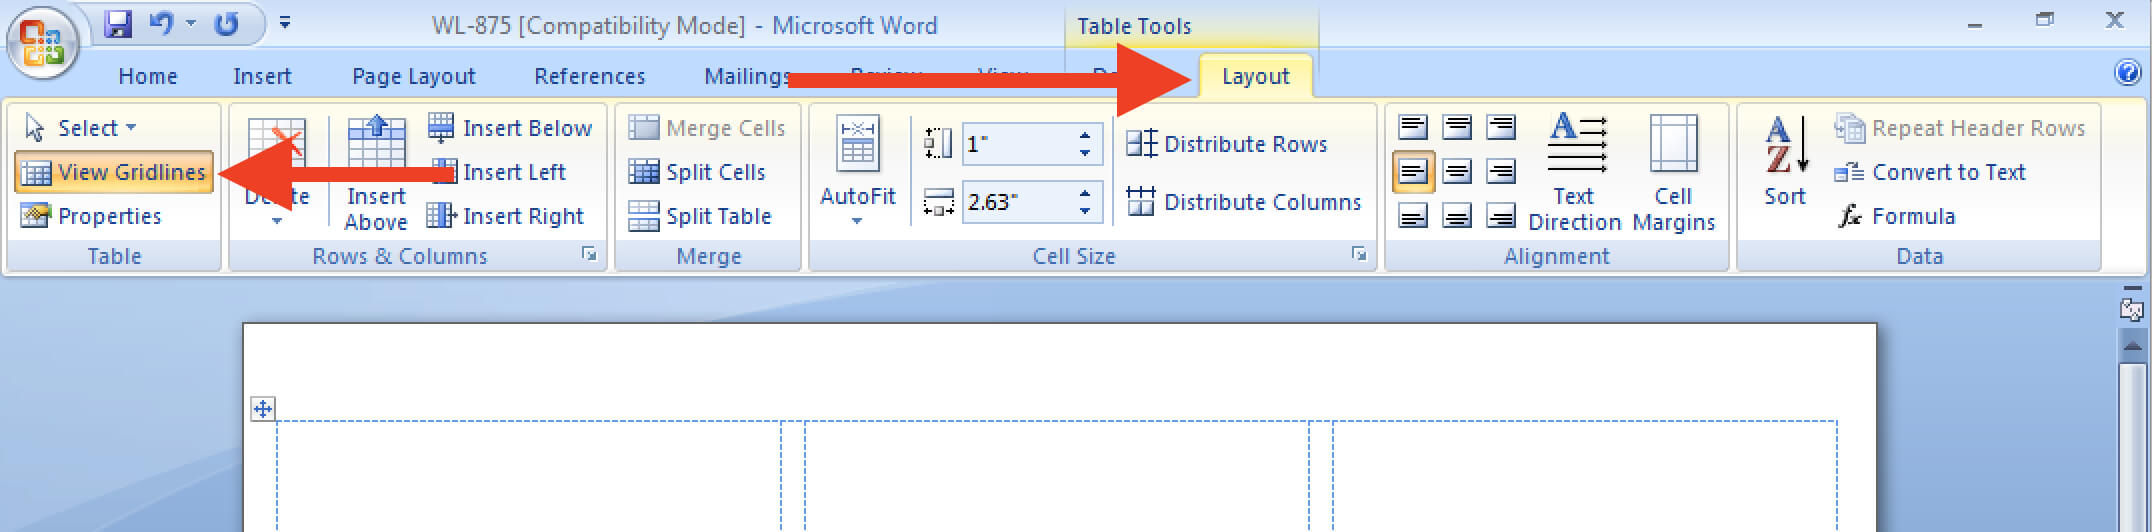 Insert And Resize Images/text Into Label Cells In A Word Pertaining To How To Insert Template In Word